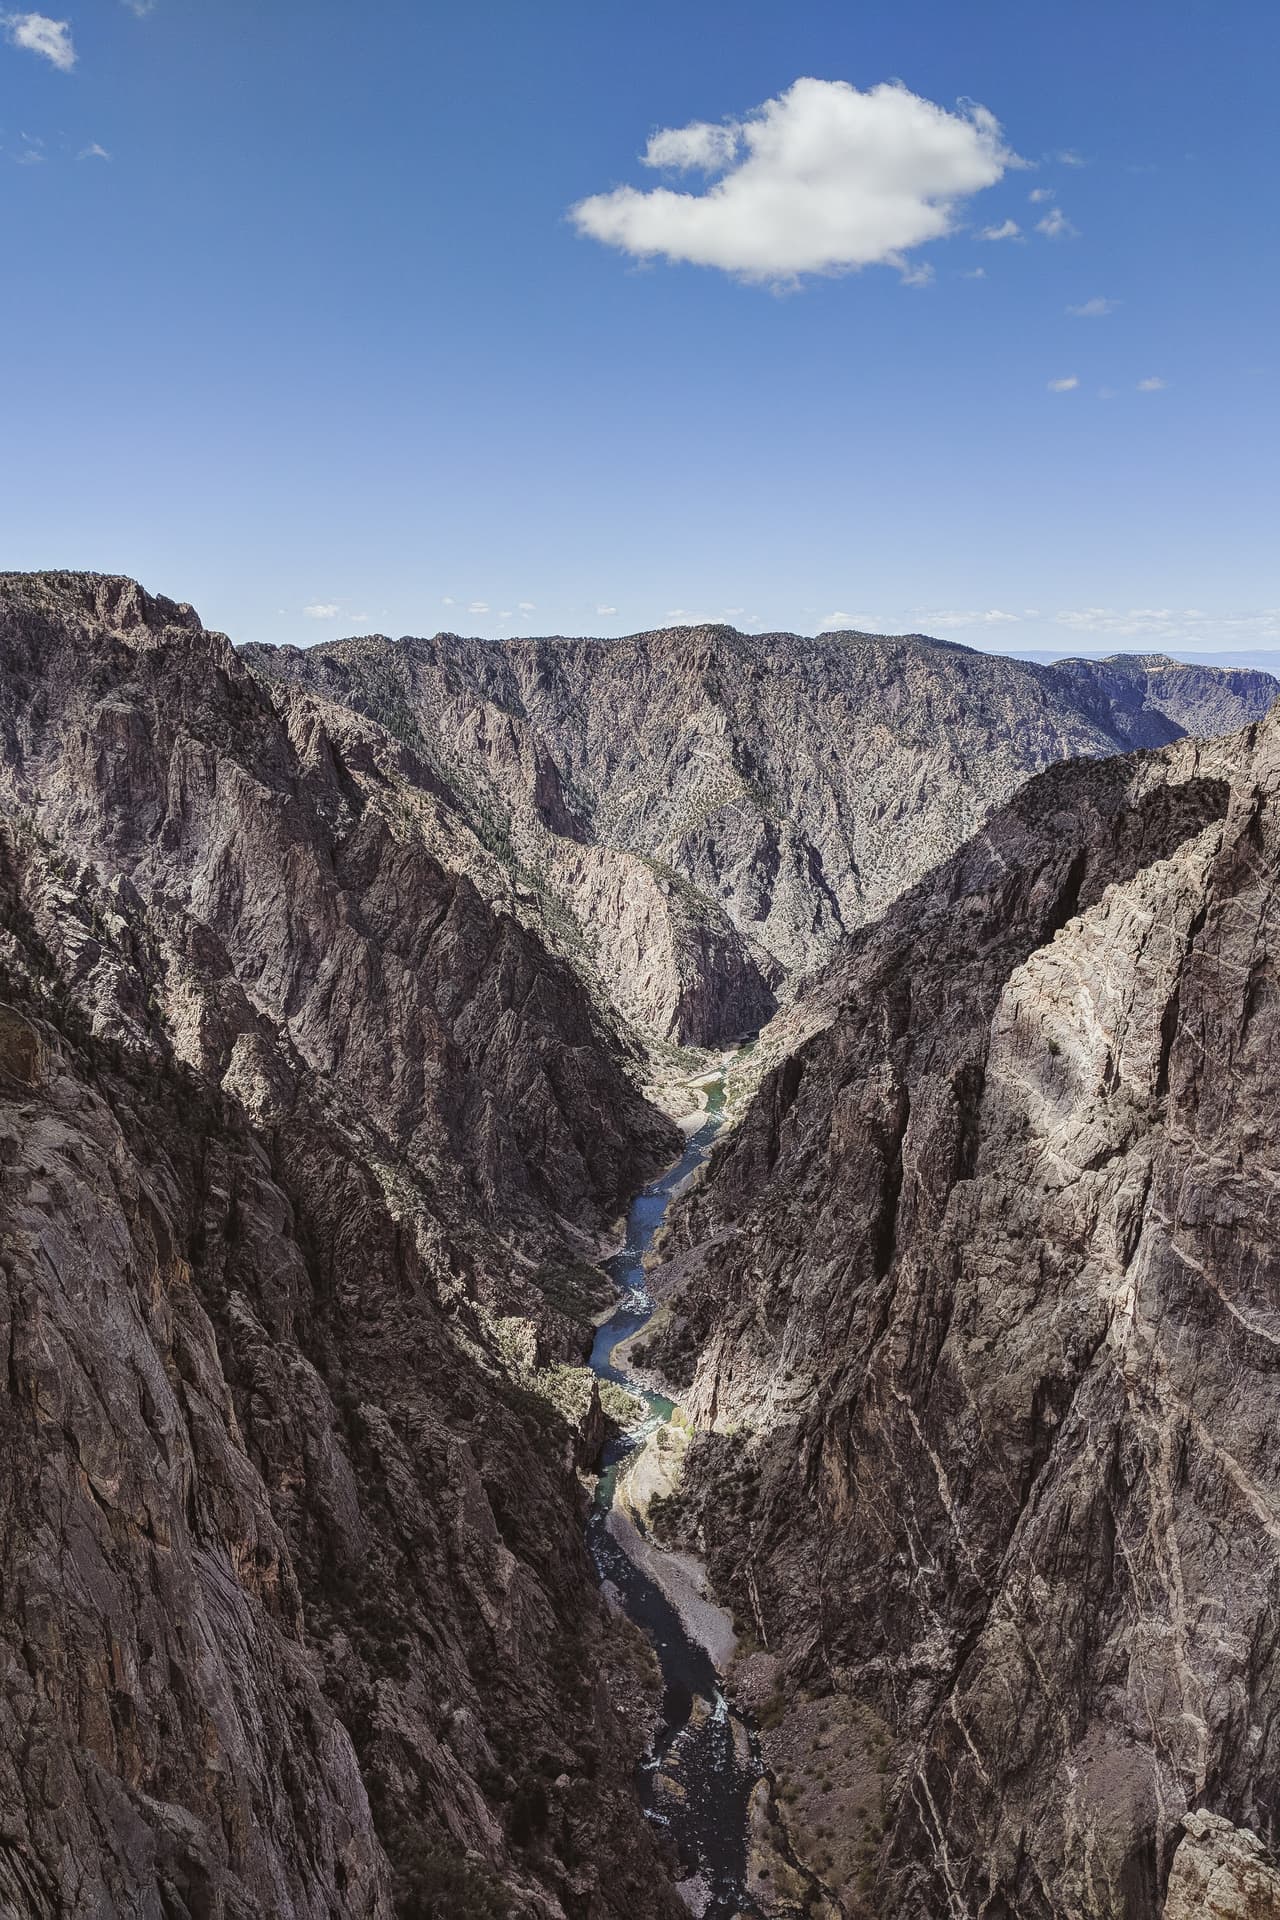 A view down the Gunnison, through the steep, broken walls of the Black Canyon.